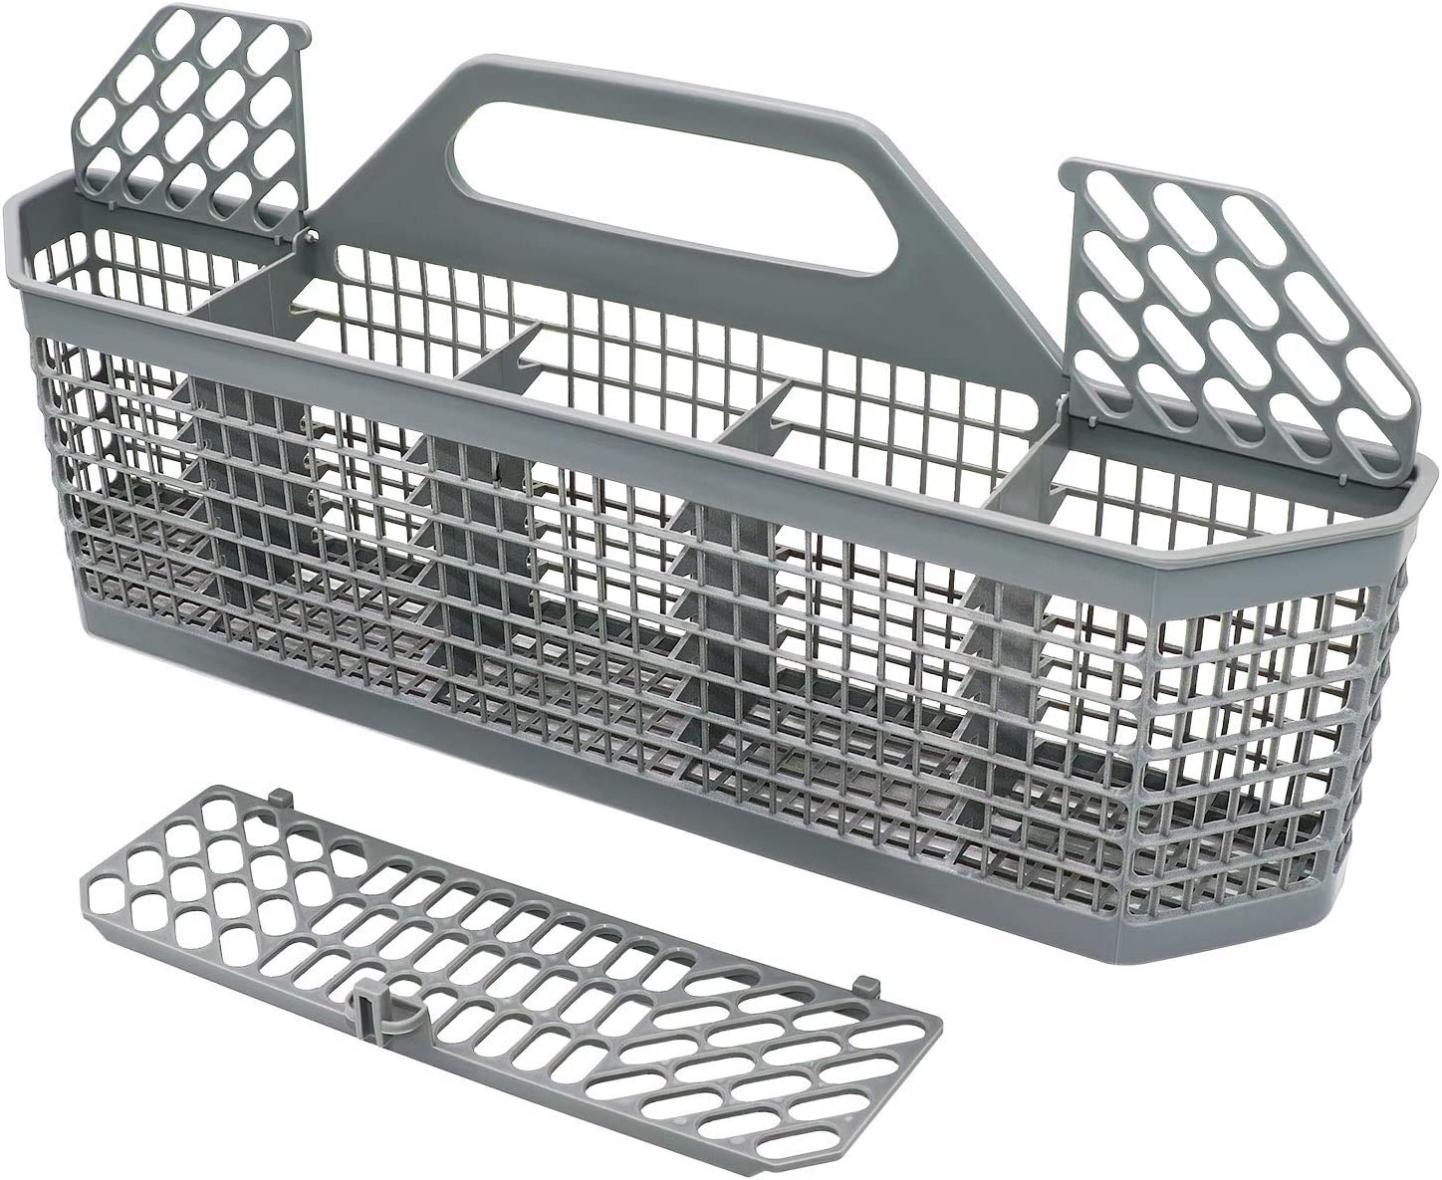 WD28X10128 Dishwasher Silverware Utensil Basket (18.89"x3.18"x8.4") Compatible With General Electric(GE) Replace Number AP3772889, 1088673, AH959351